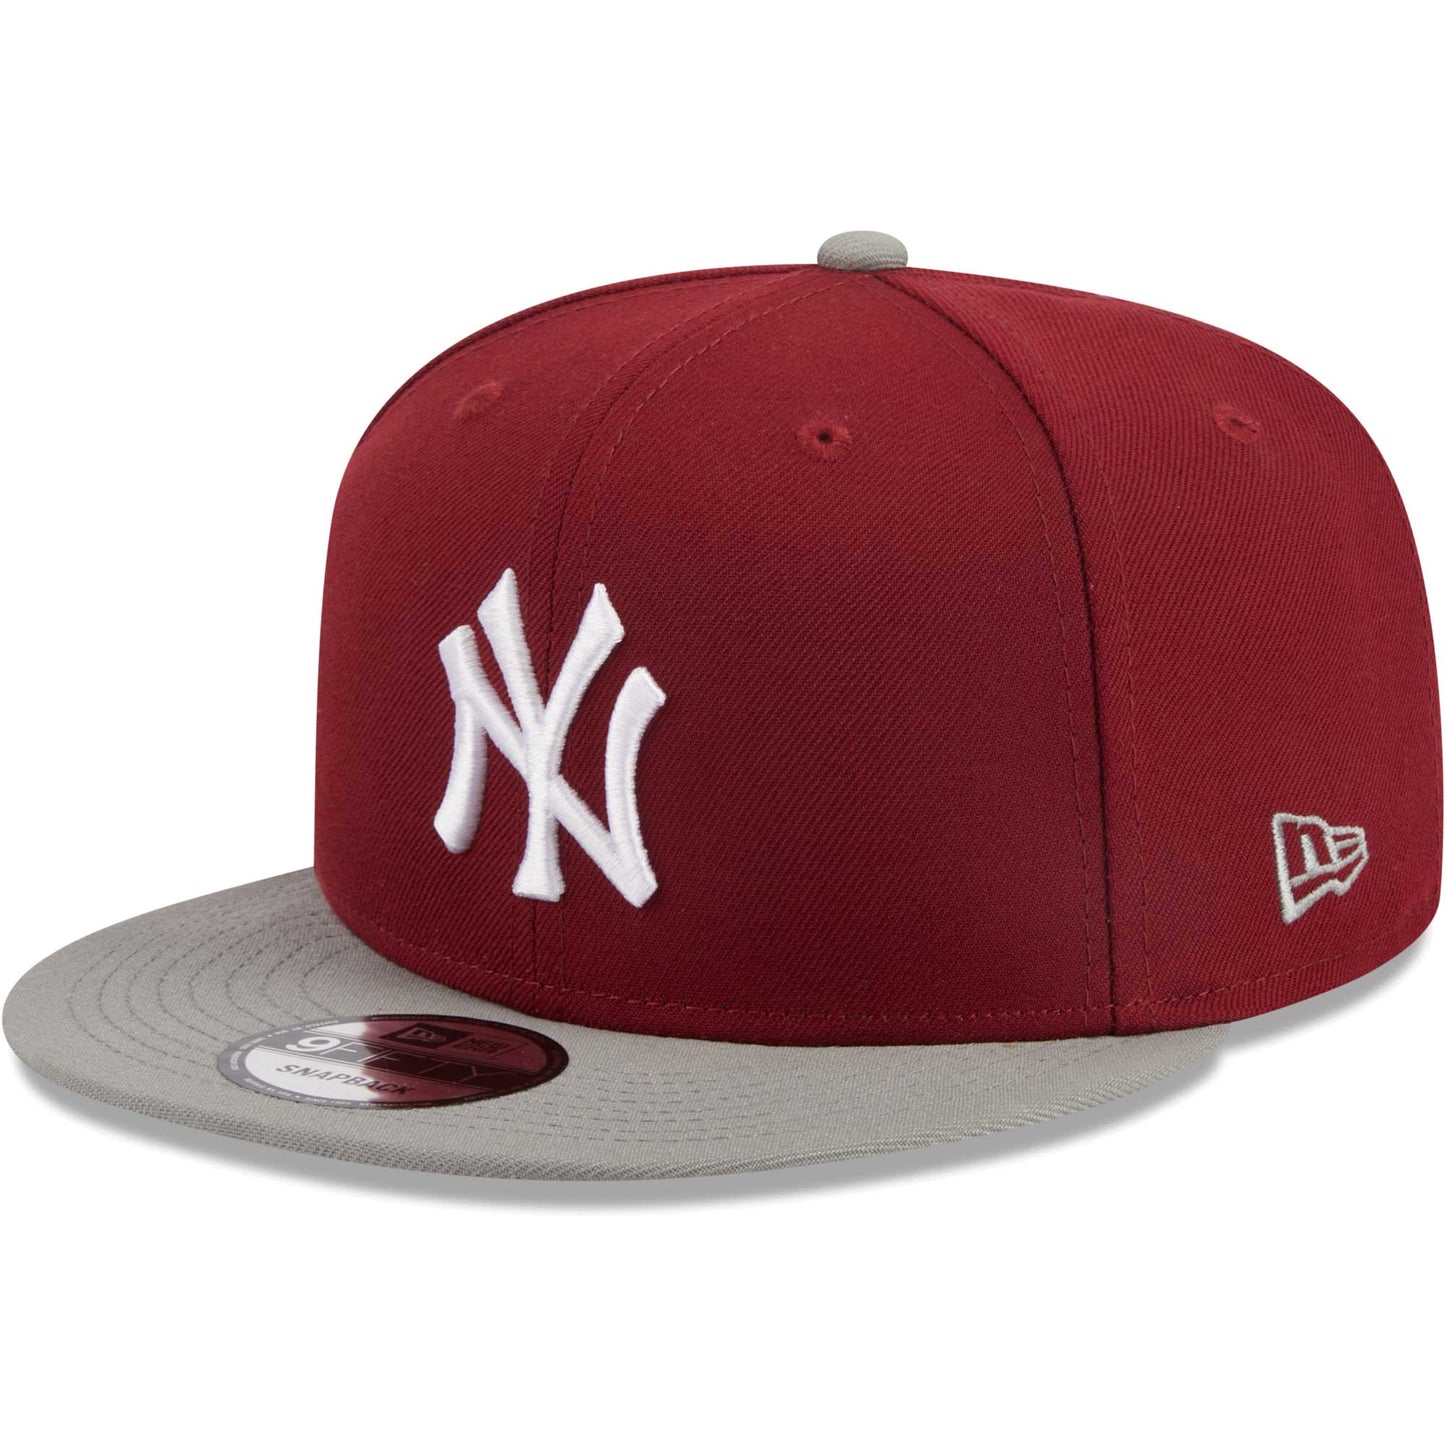 New York Yankees New Era Two-Tone Color Pack 9FIFTY Snapback Hat - Cardinal